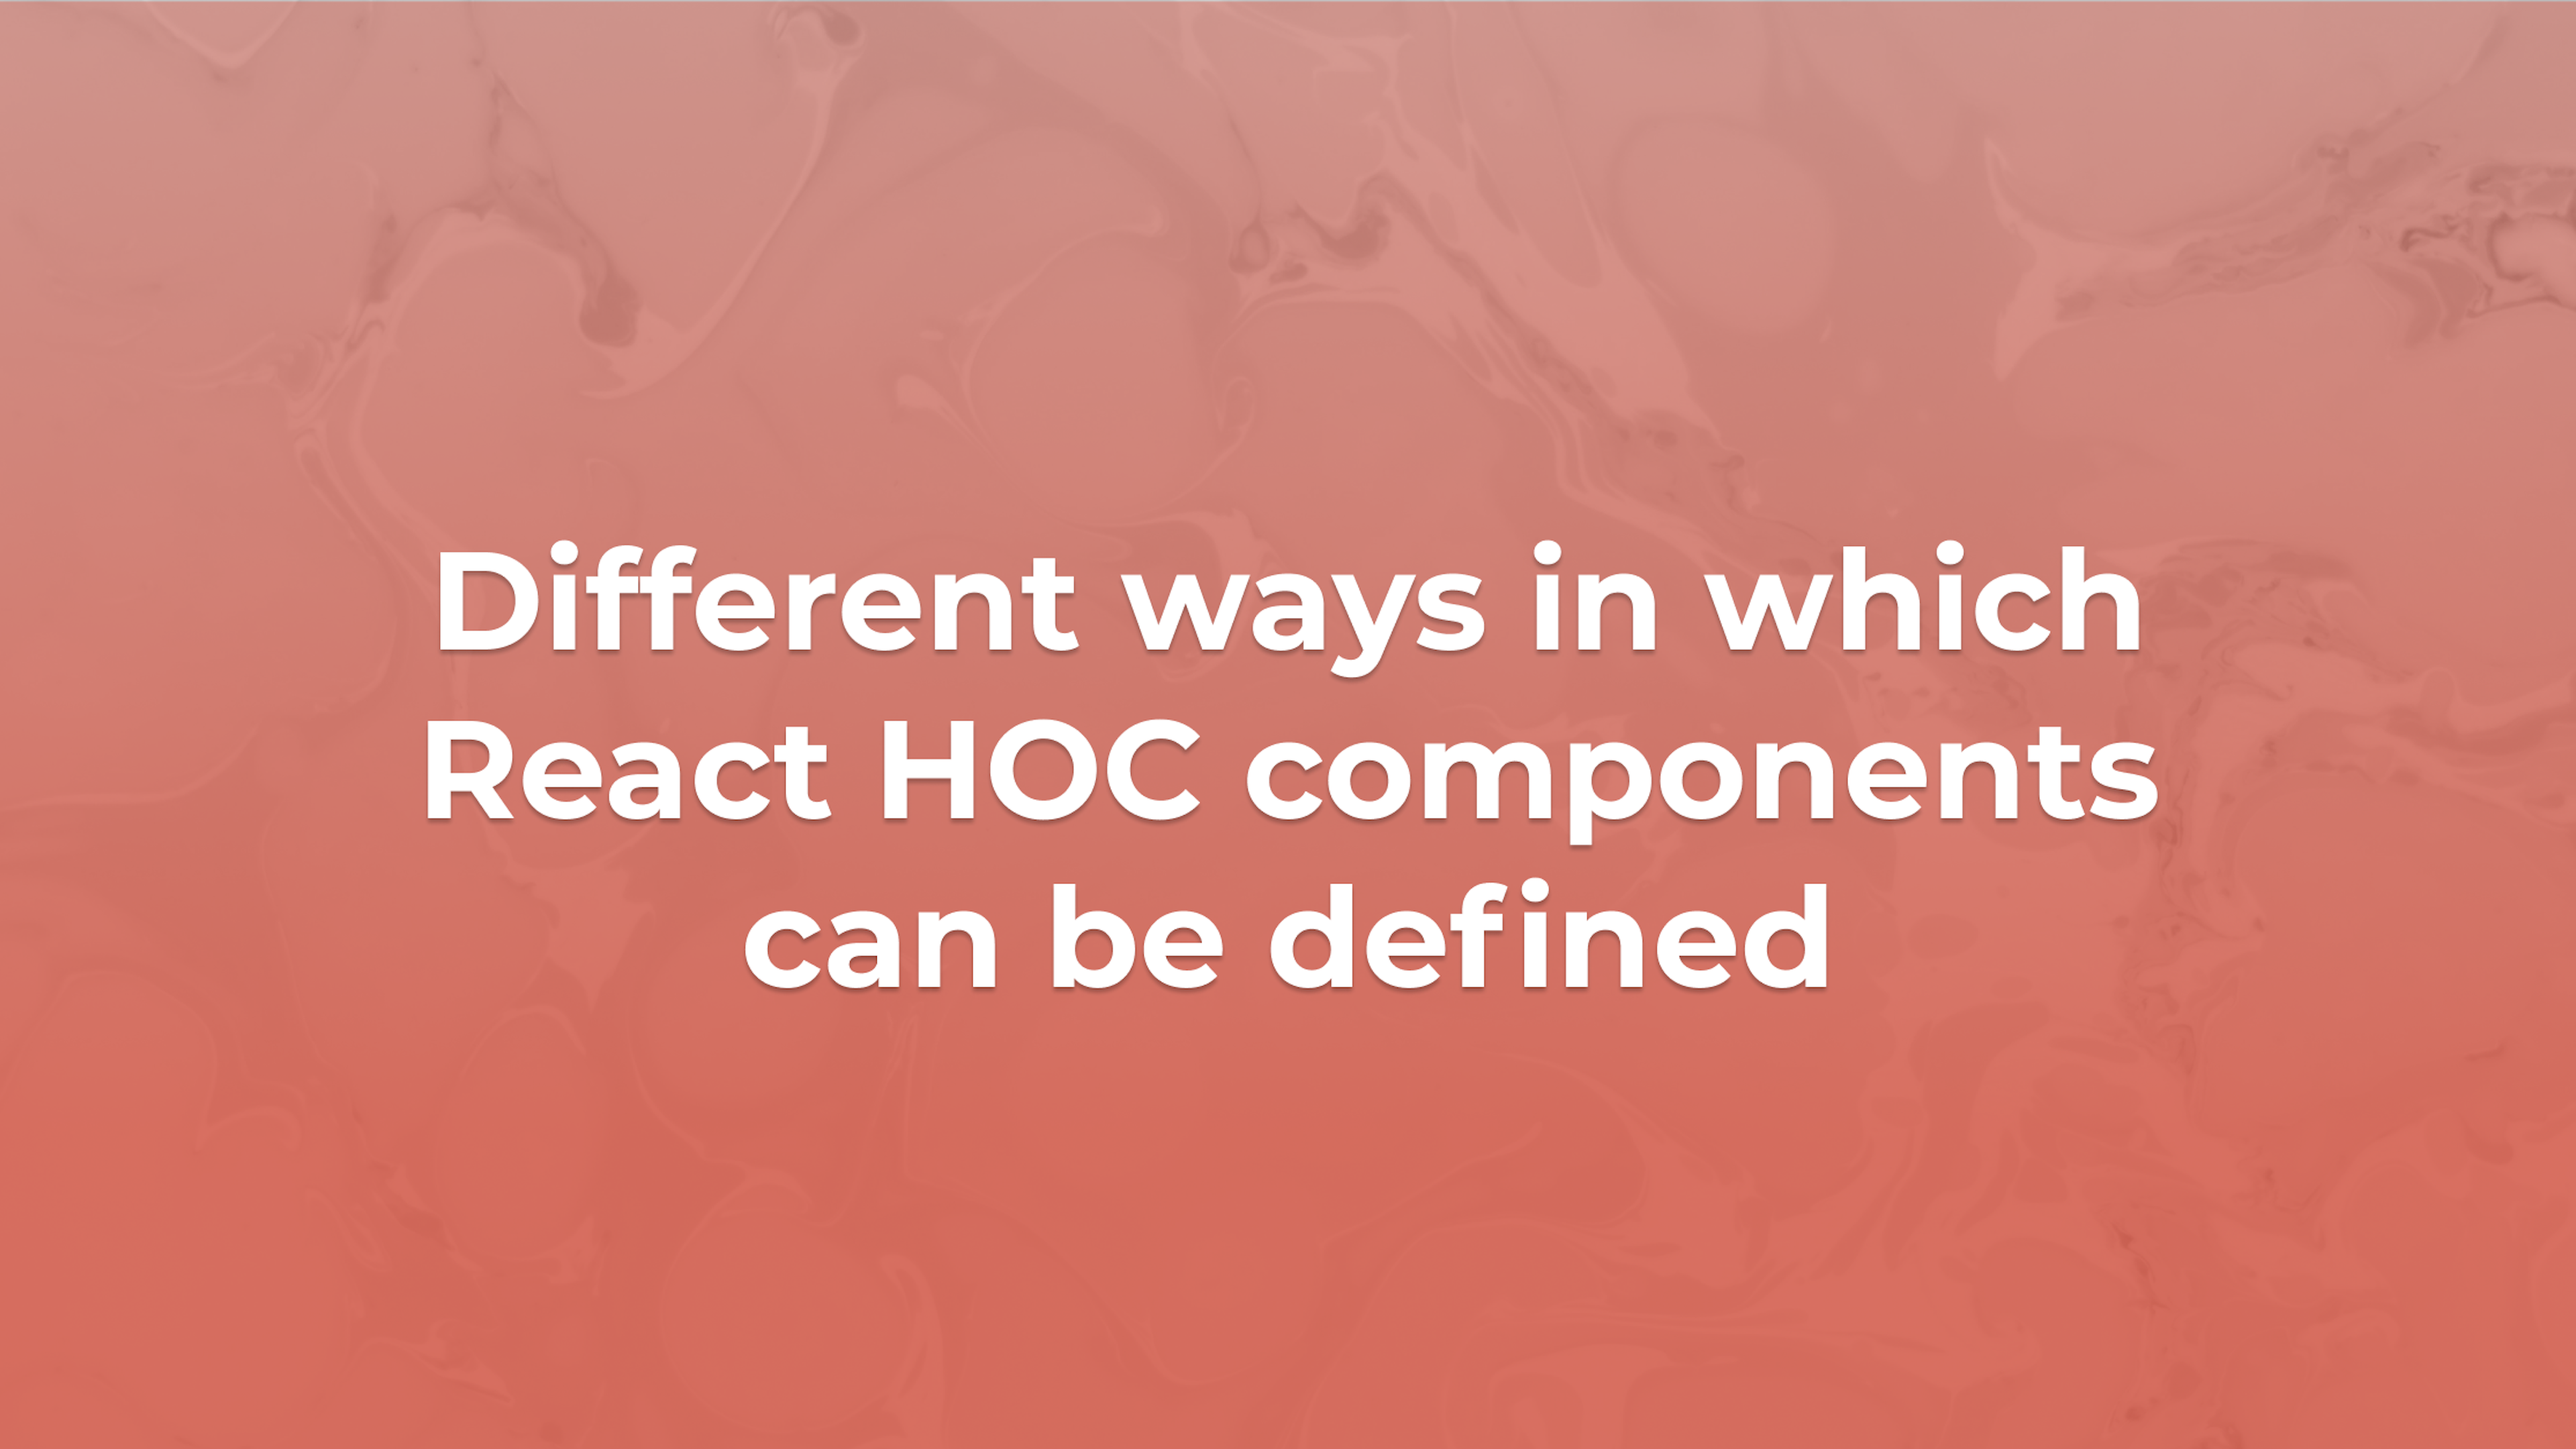 What are the different ways in which React HOC components can be defined?